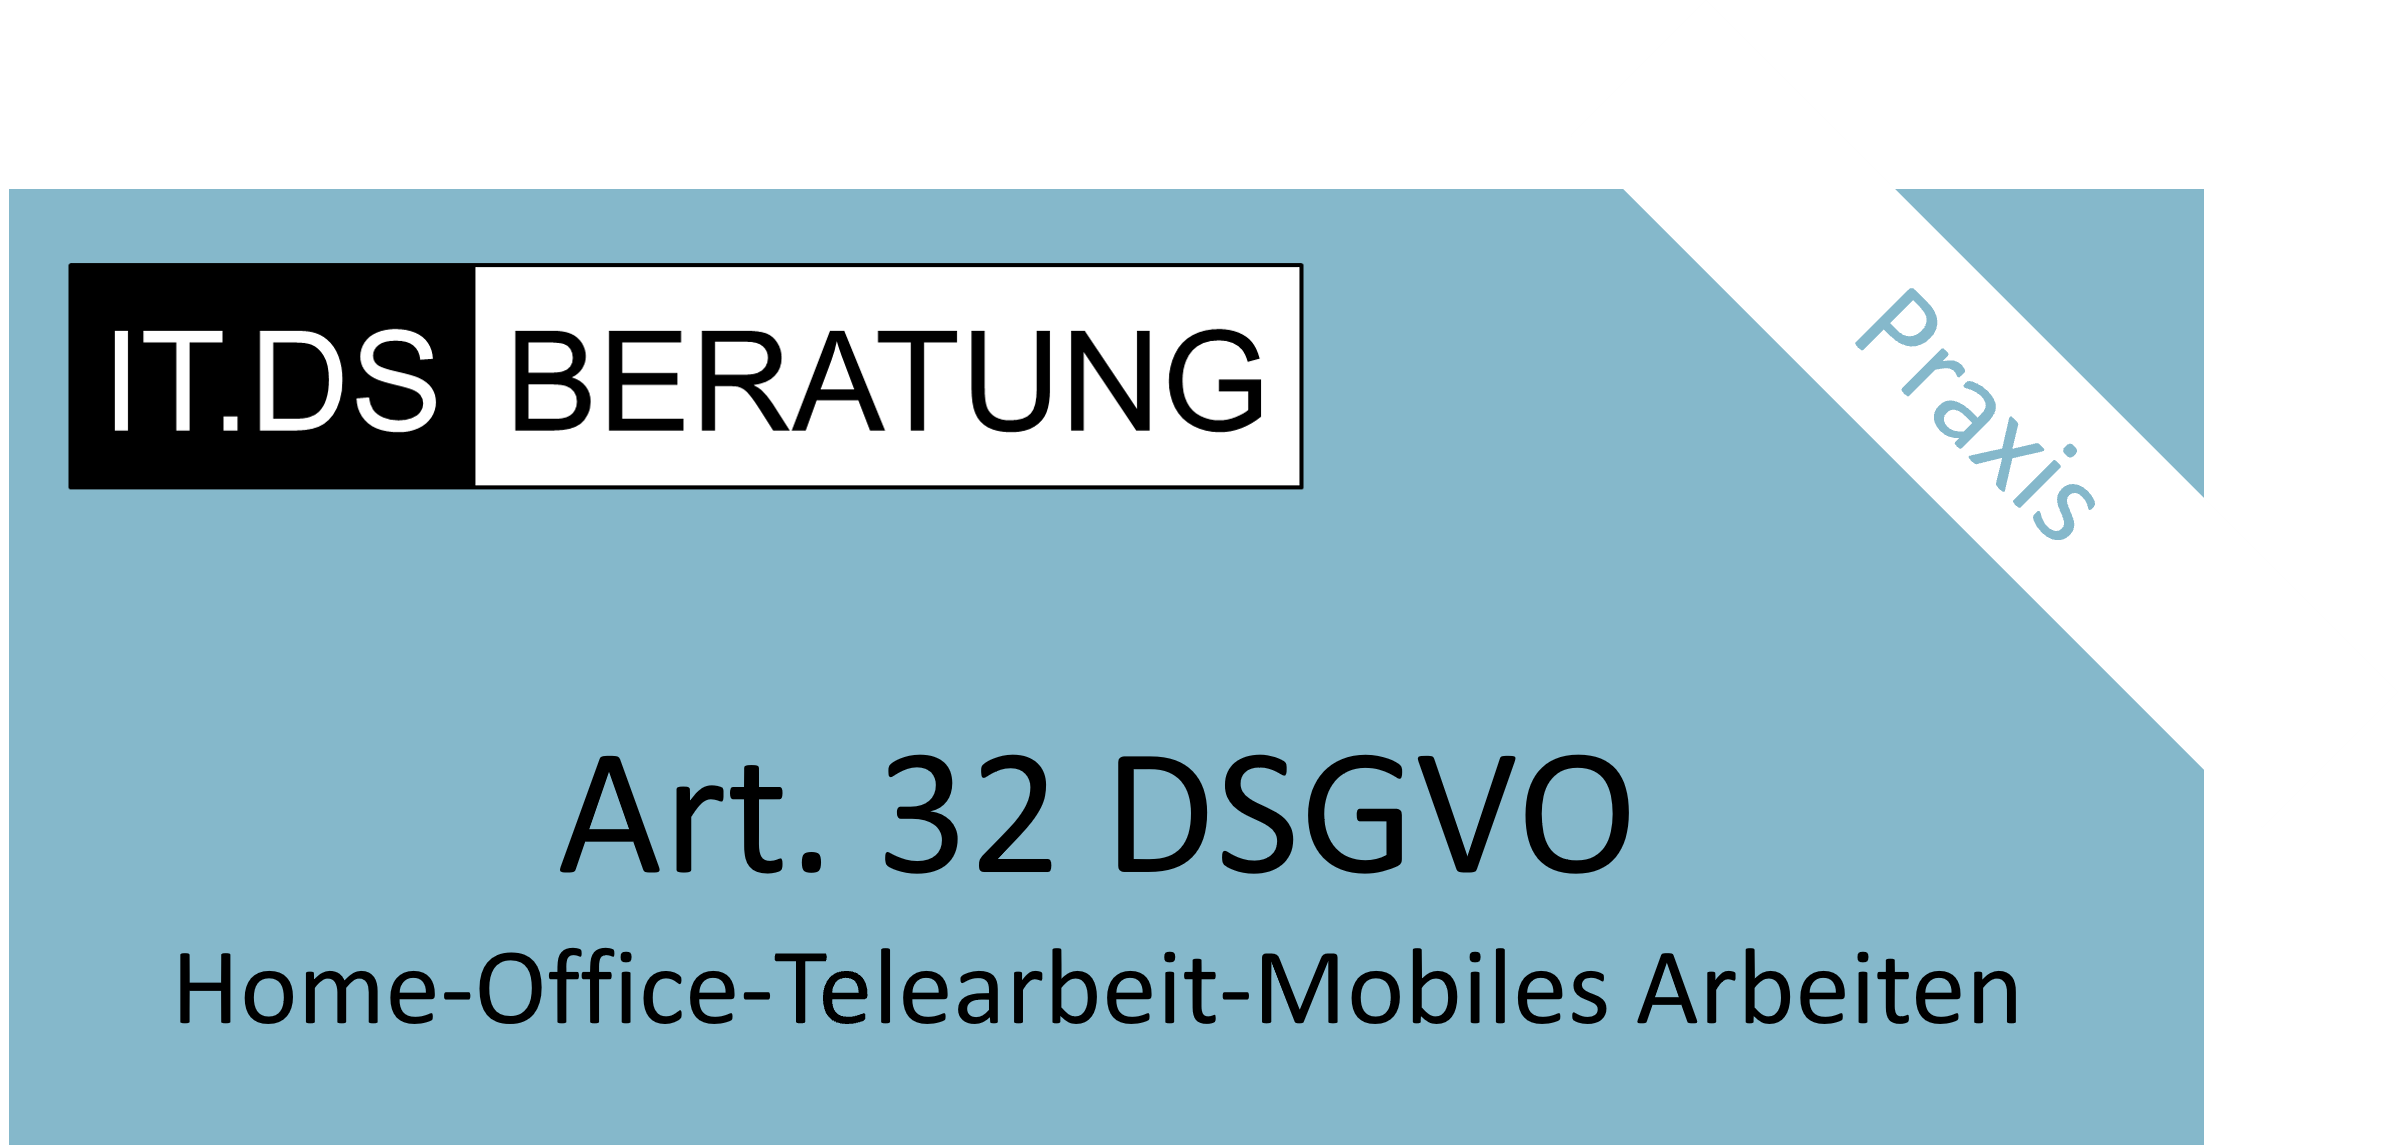 You are currently viewing Home-Office, Telearbeit und Mobiles Arbeiten